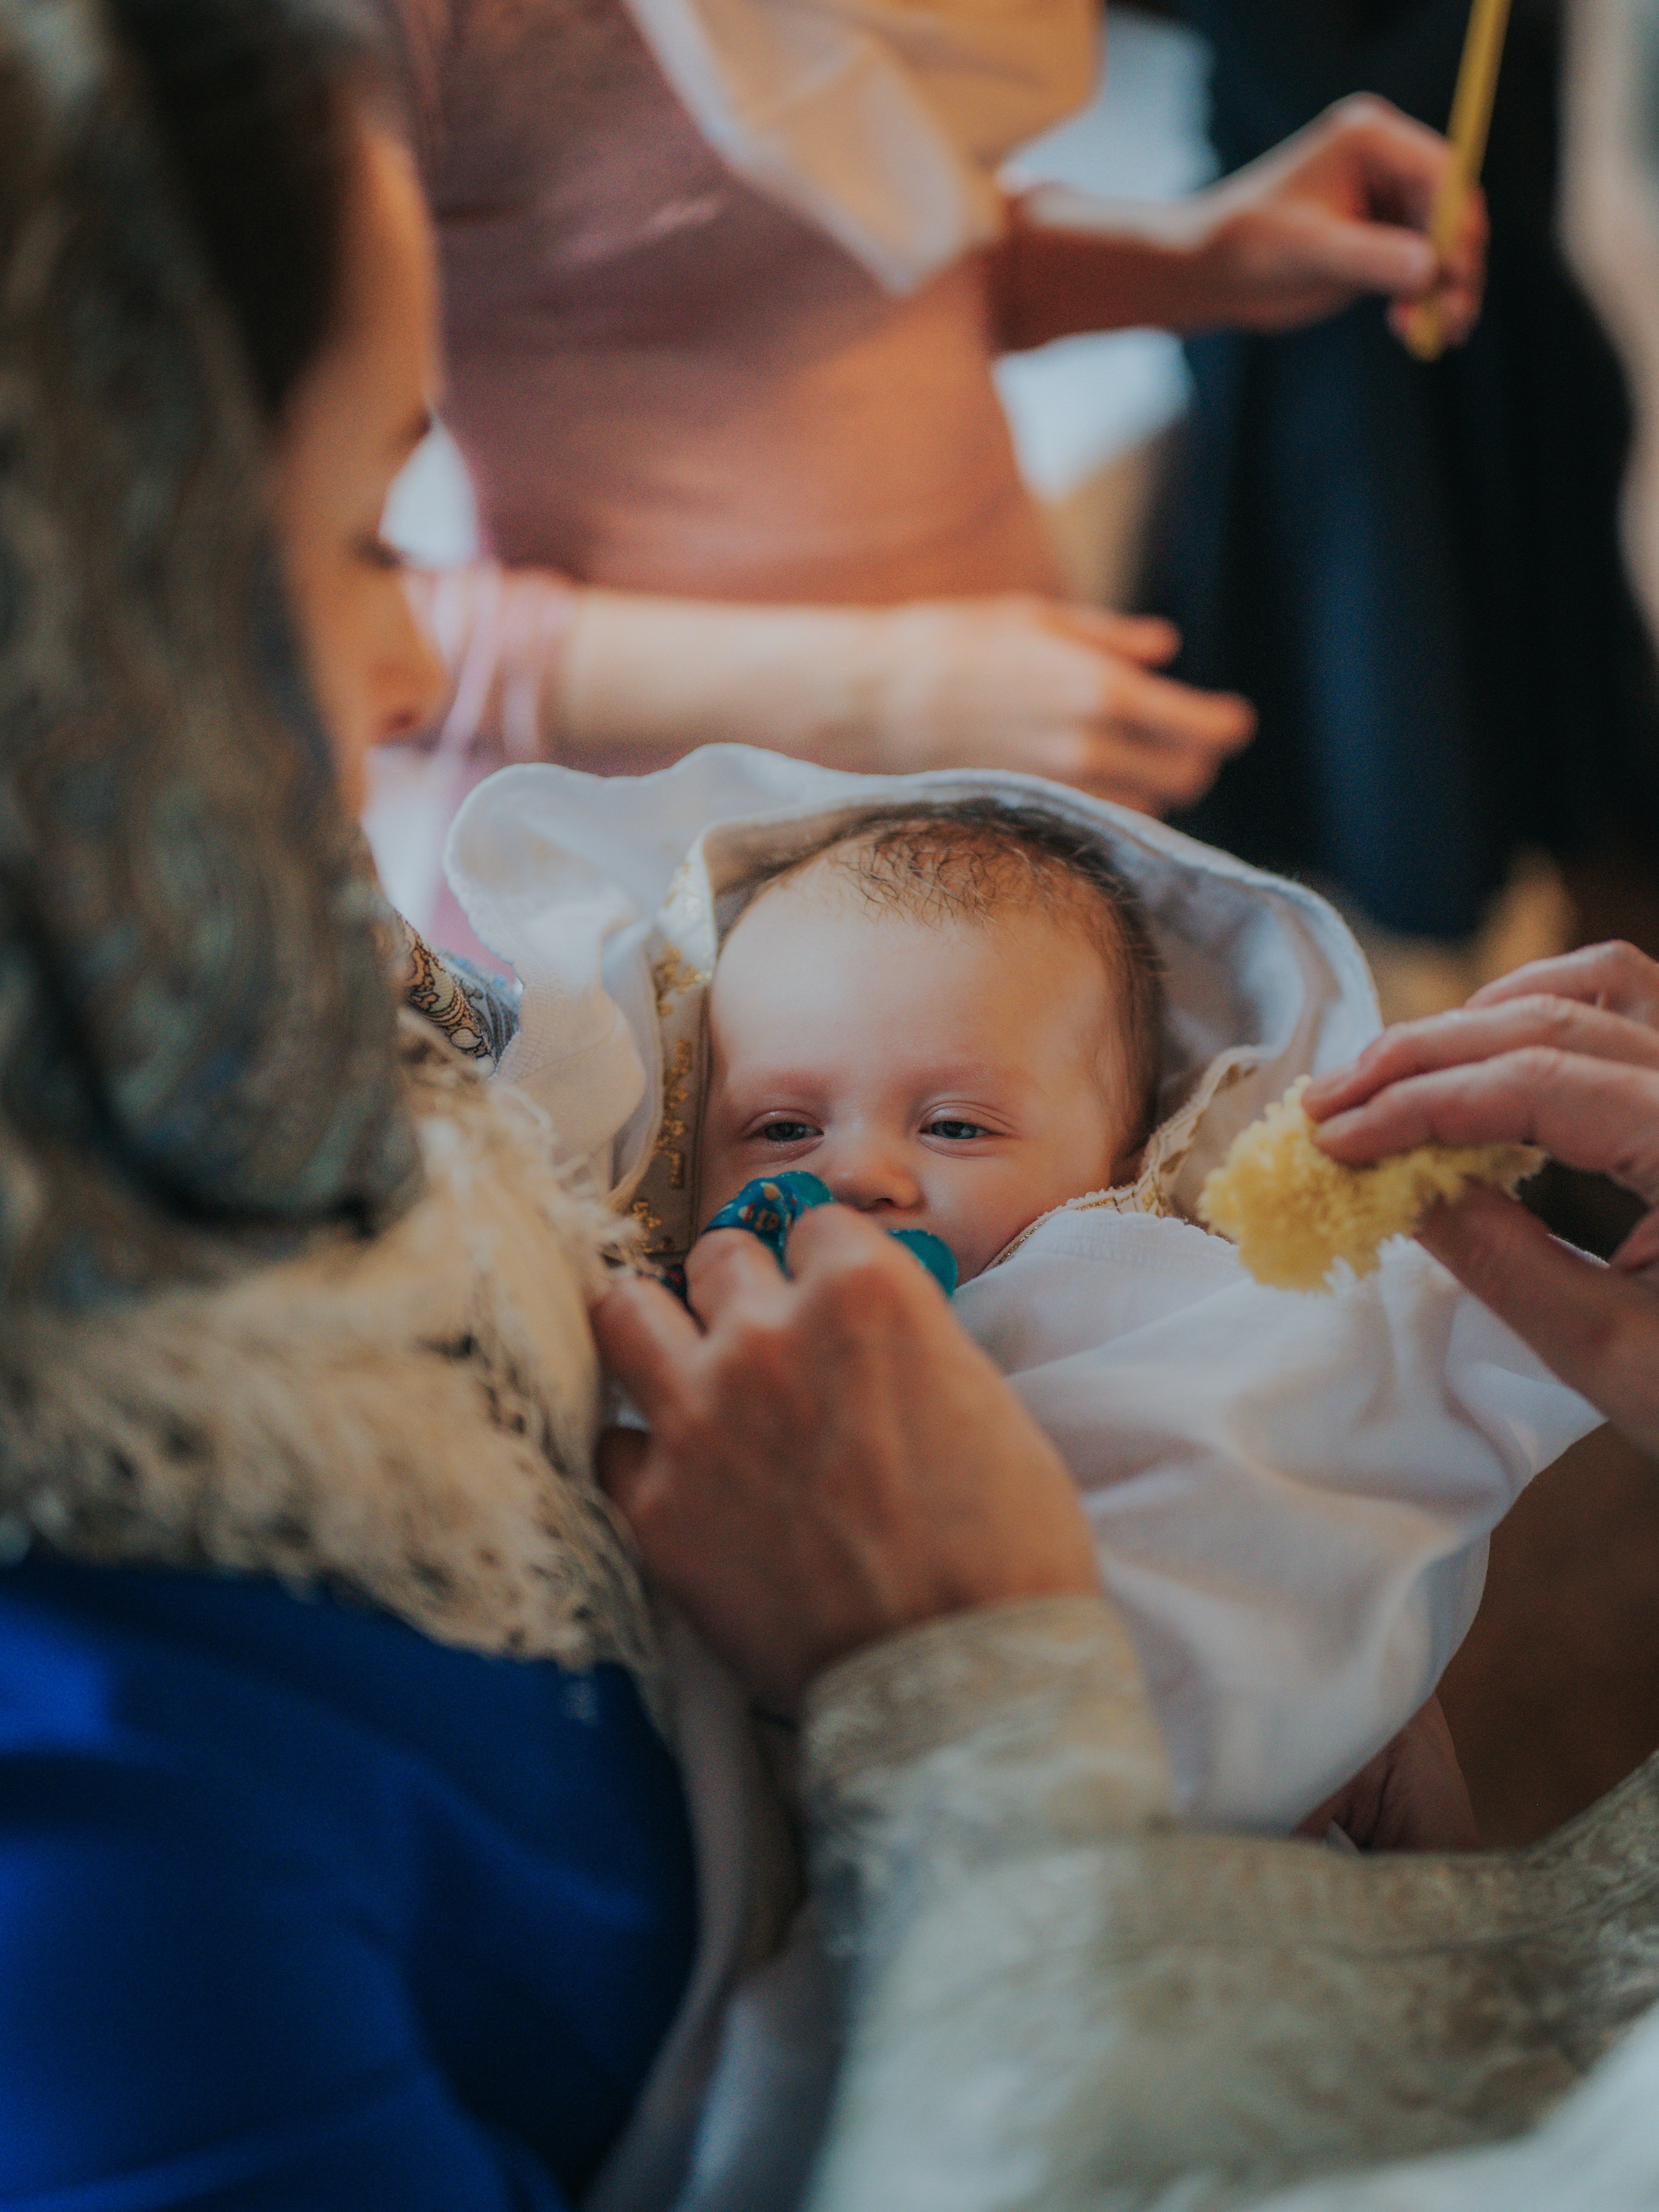 Erin felt an odd connection to the baby. | Source: Pexels